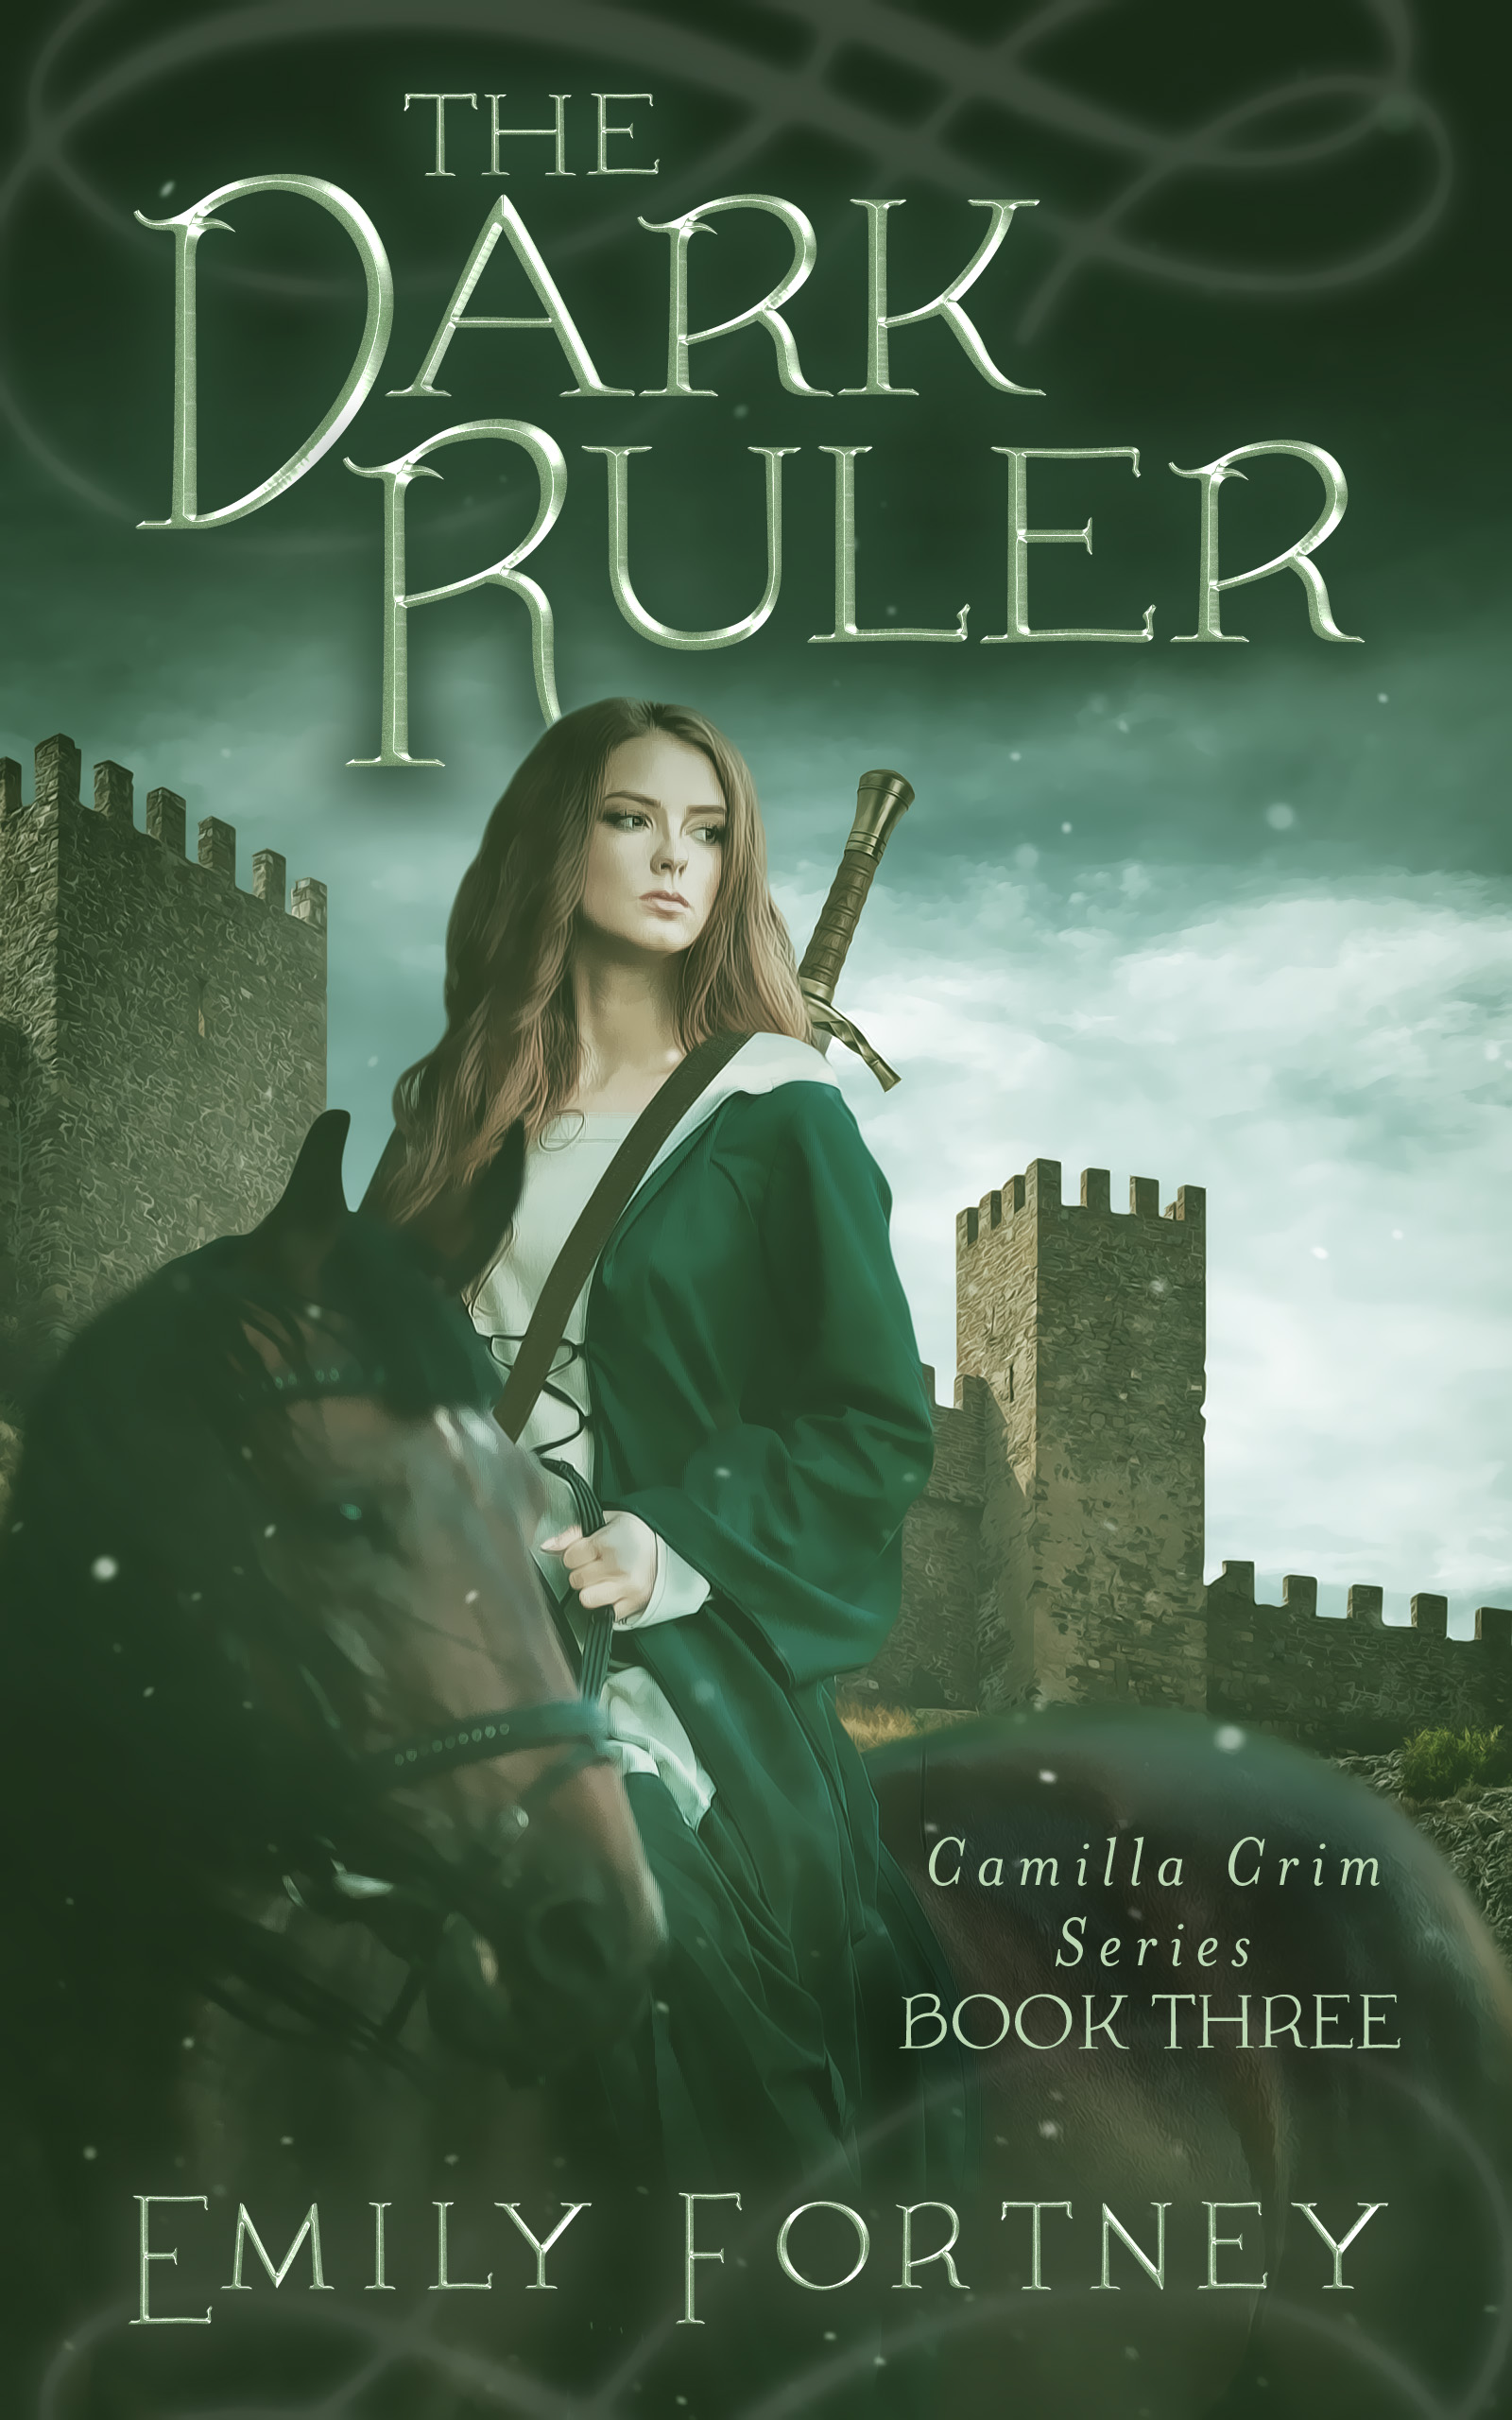 New Release Date for The Dark Ruler!